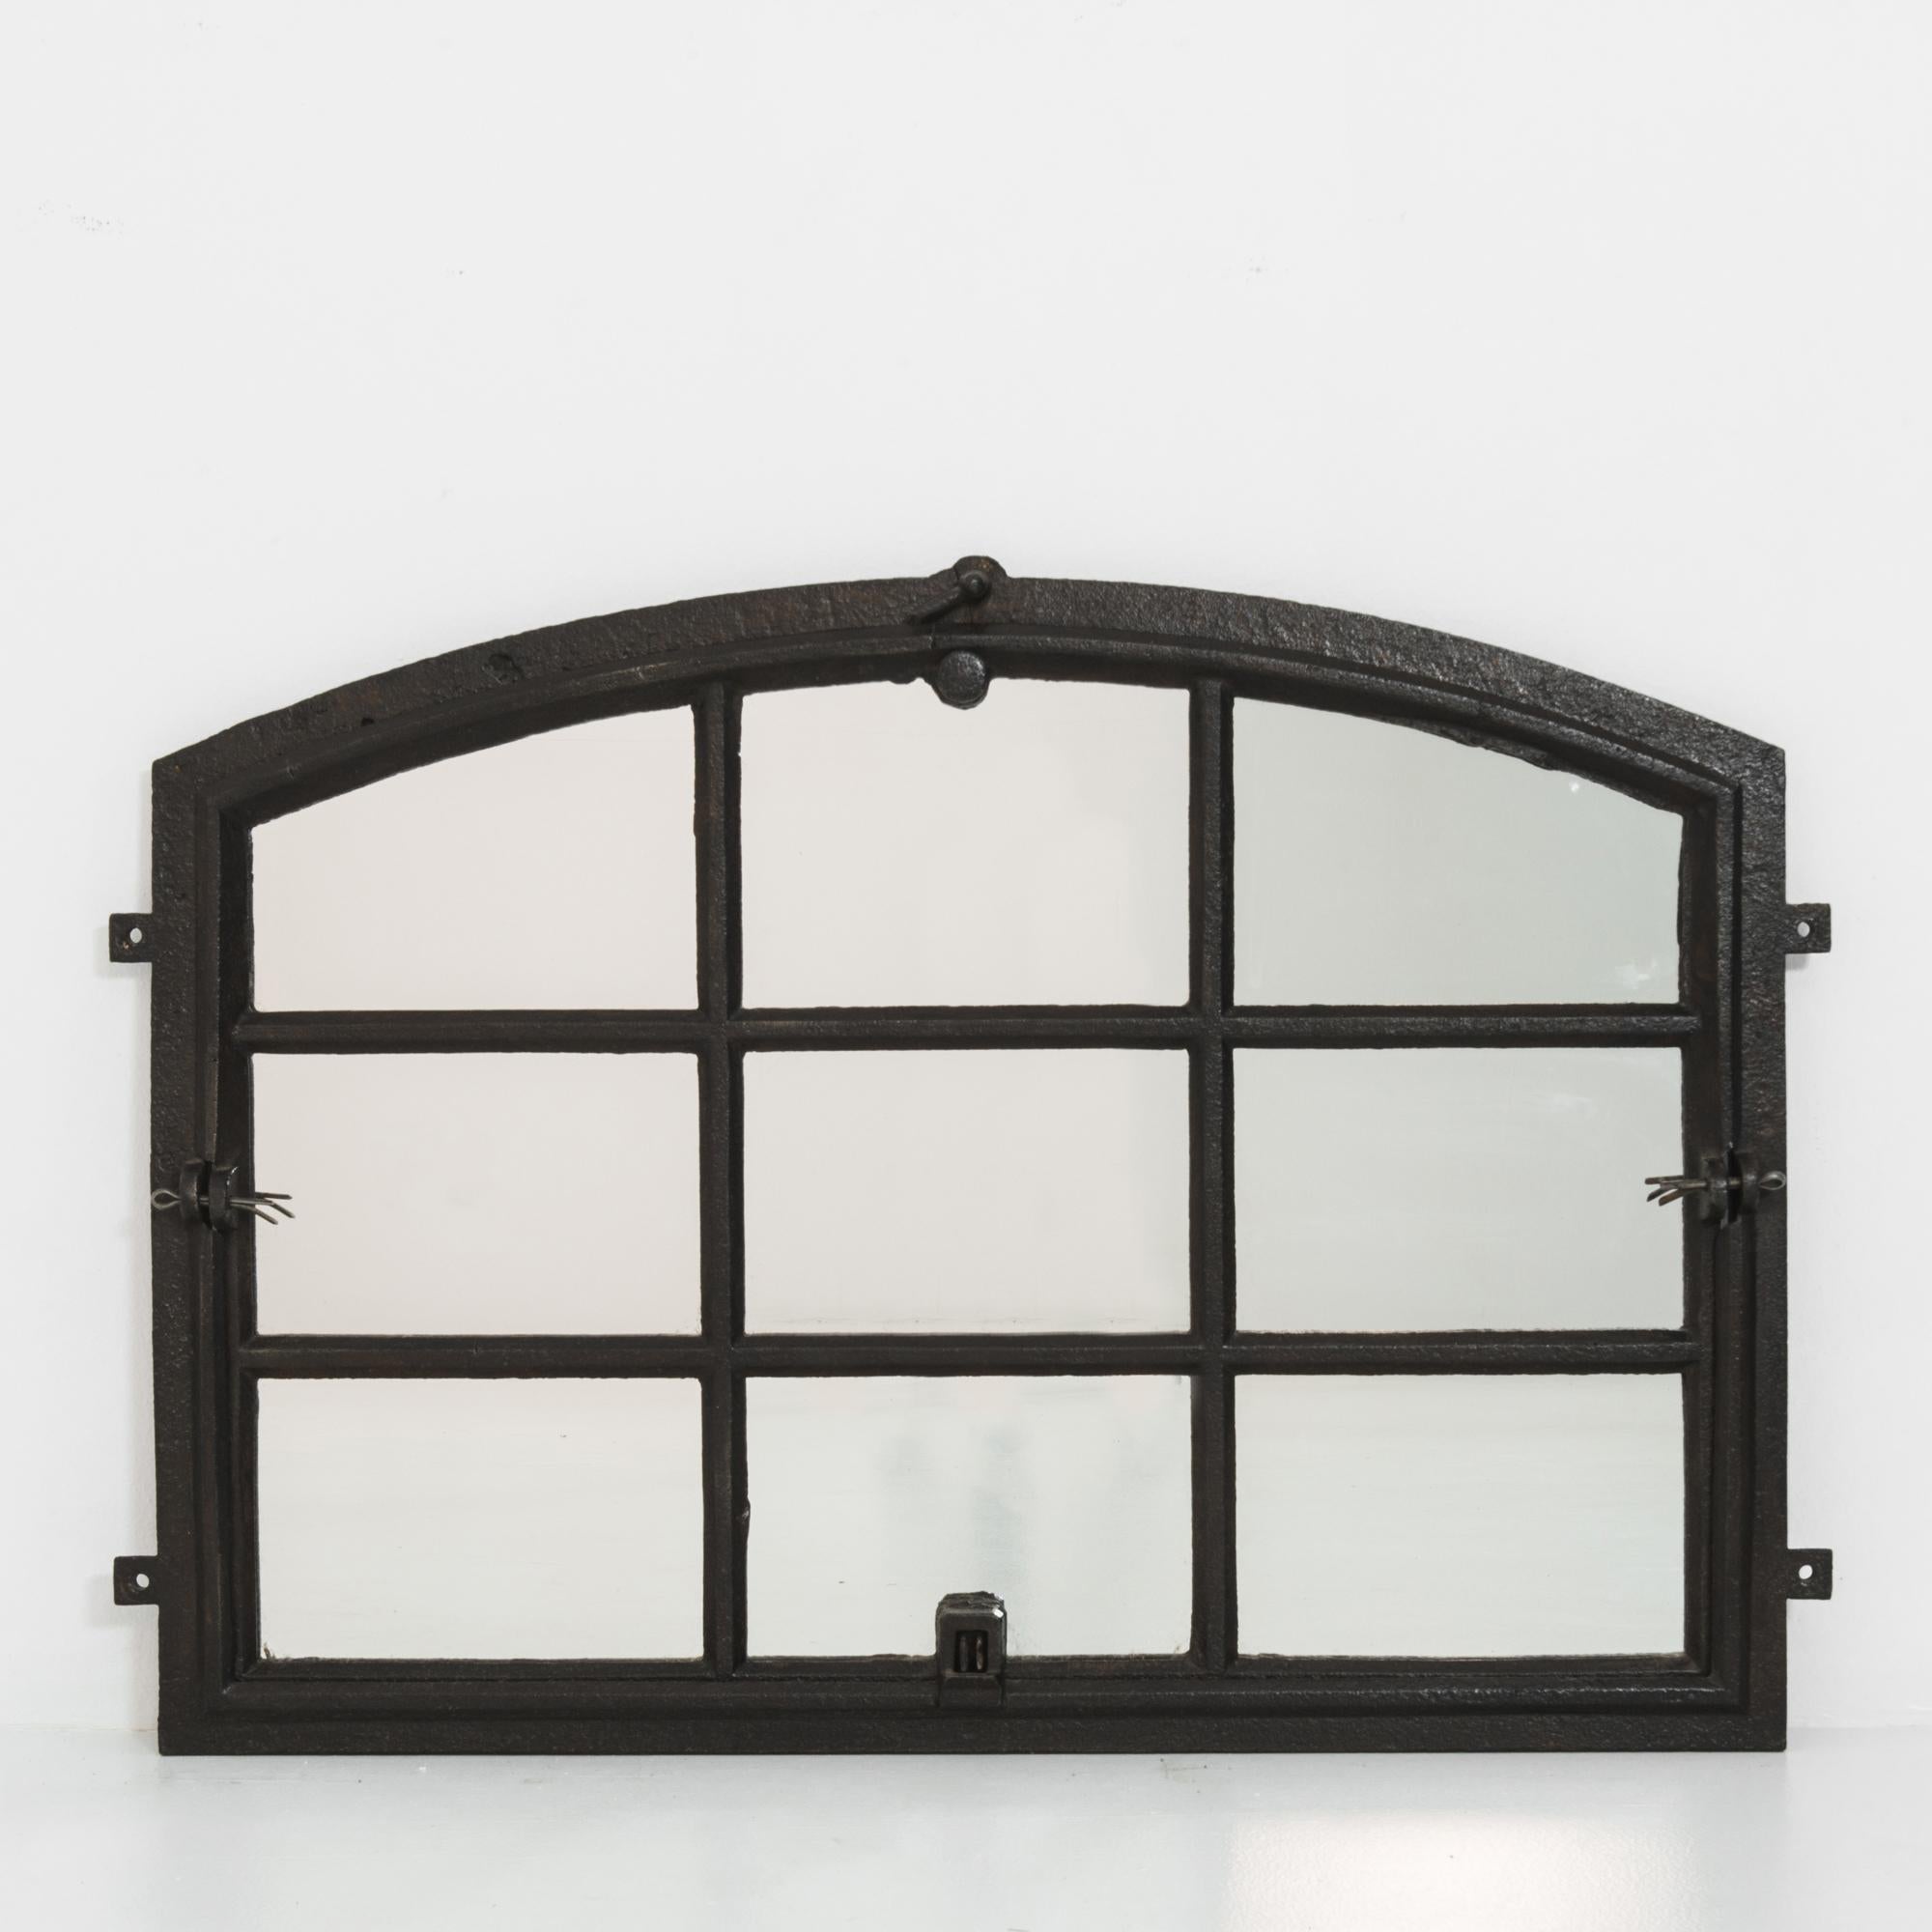 A 1920s cast iron mirror from Central Europe. Originally a factory window, the dark color and solid heft of the metal create an impressive sense of presence. The gridded panes are crowned by a wide arch; iron hinges and window fastenings provide